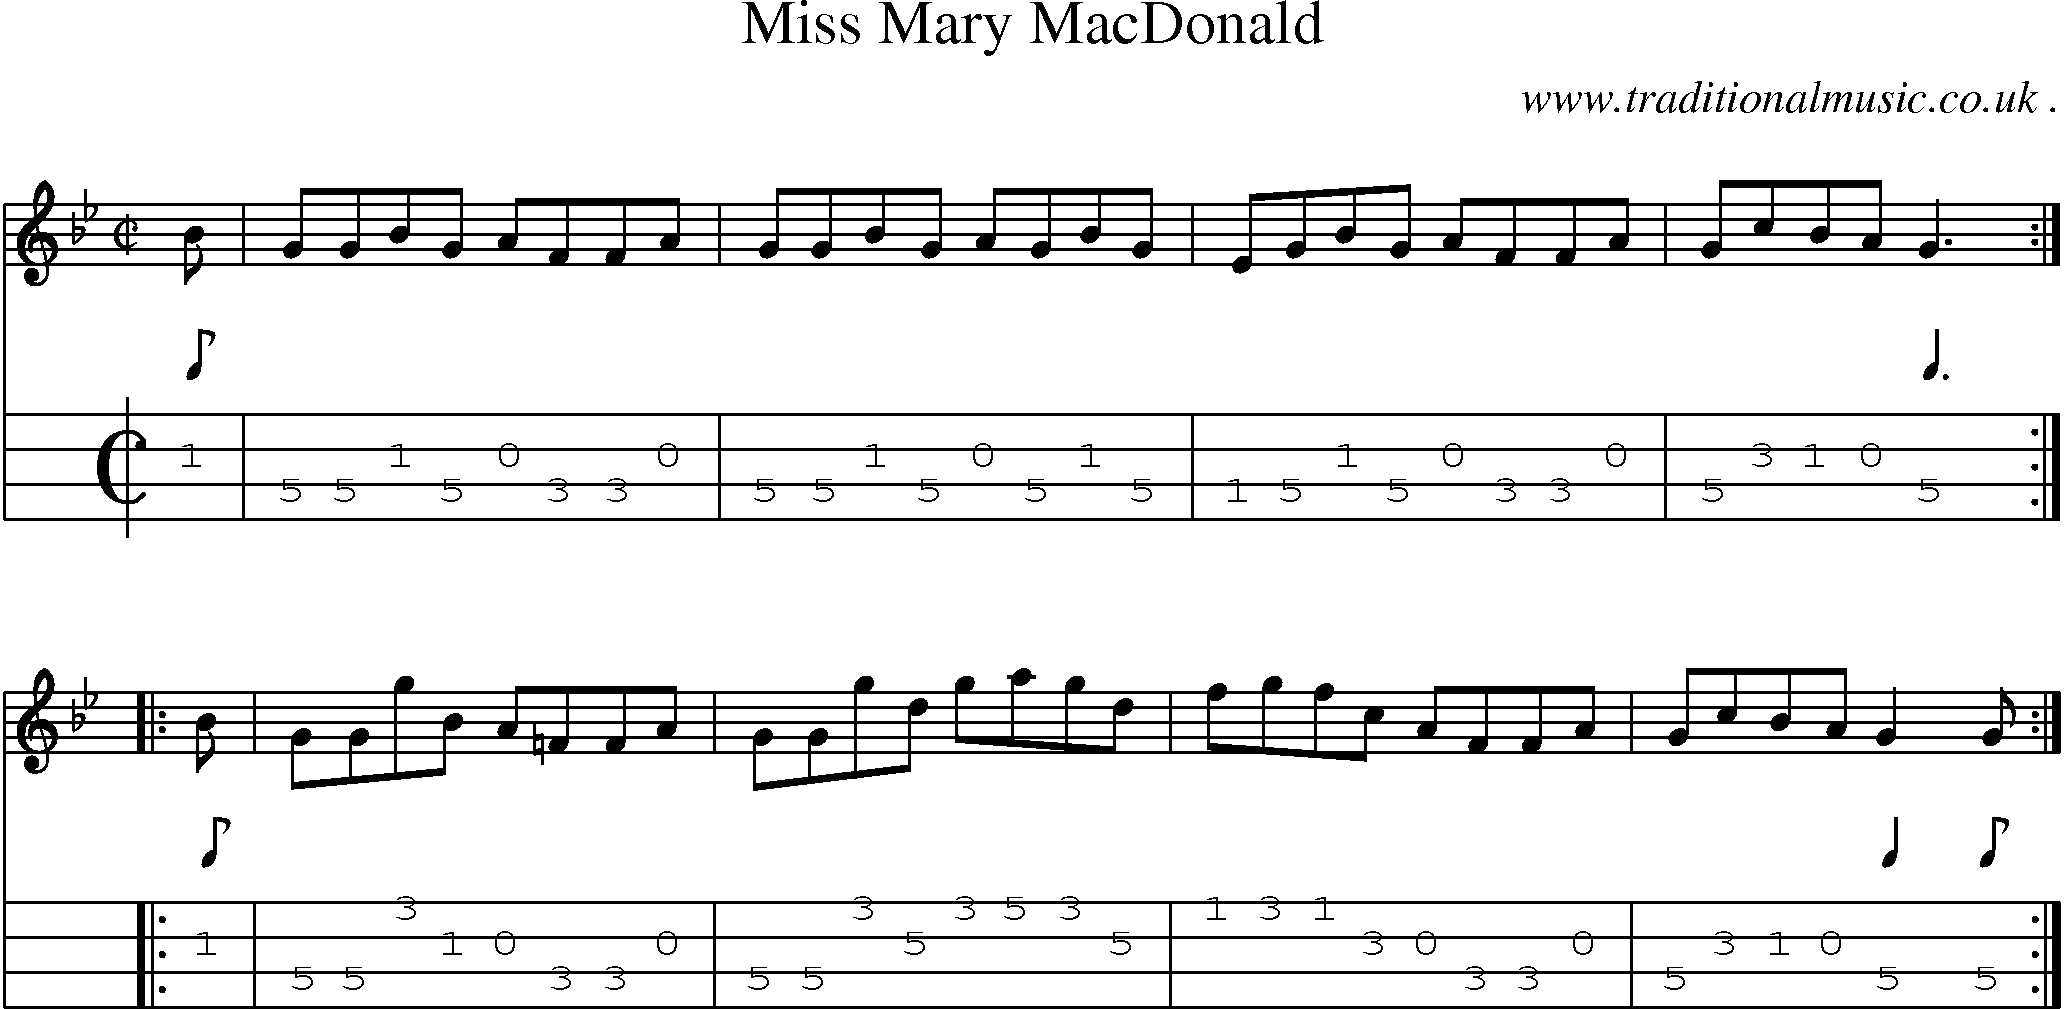 Sheet-music  score, Chords and Mandolin Tabs for Miss Mary Macdonald